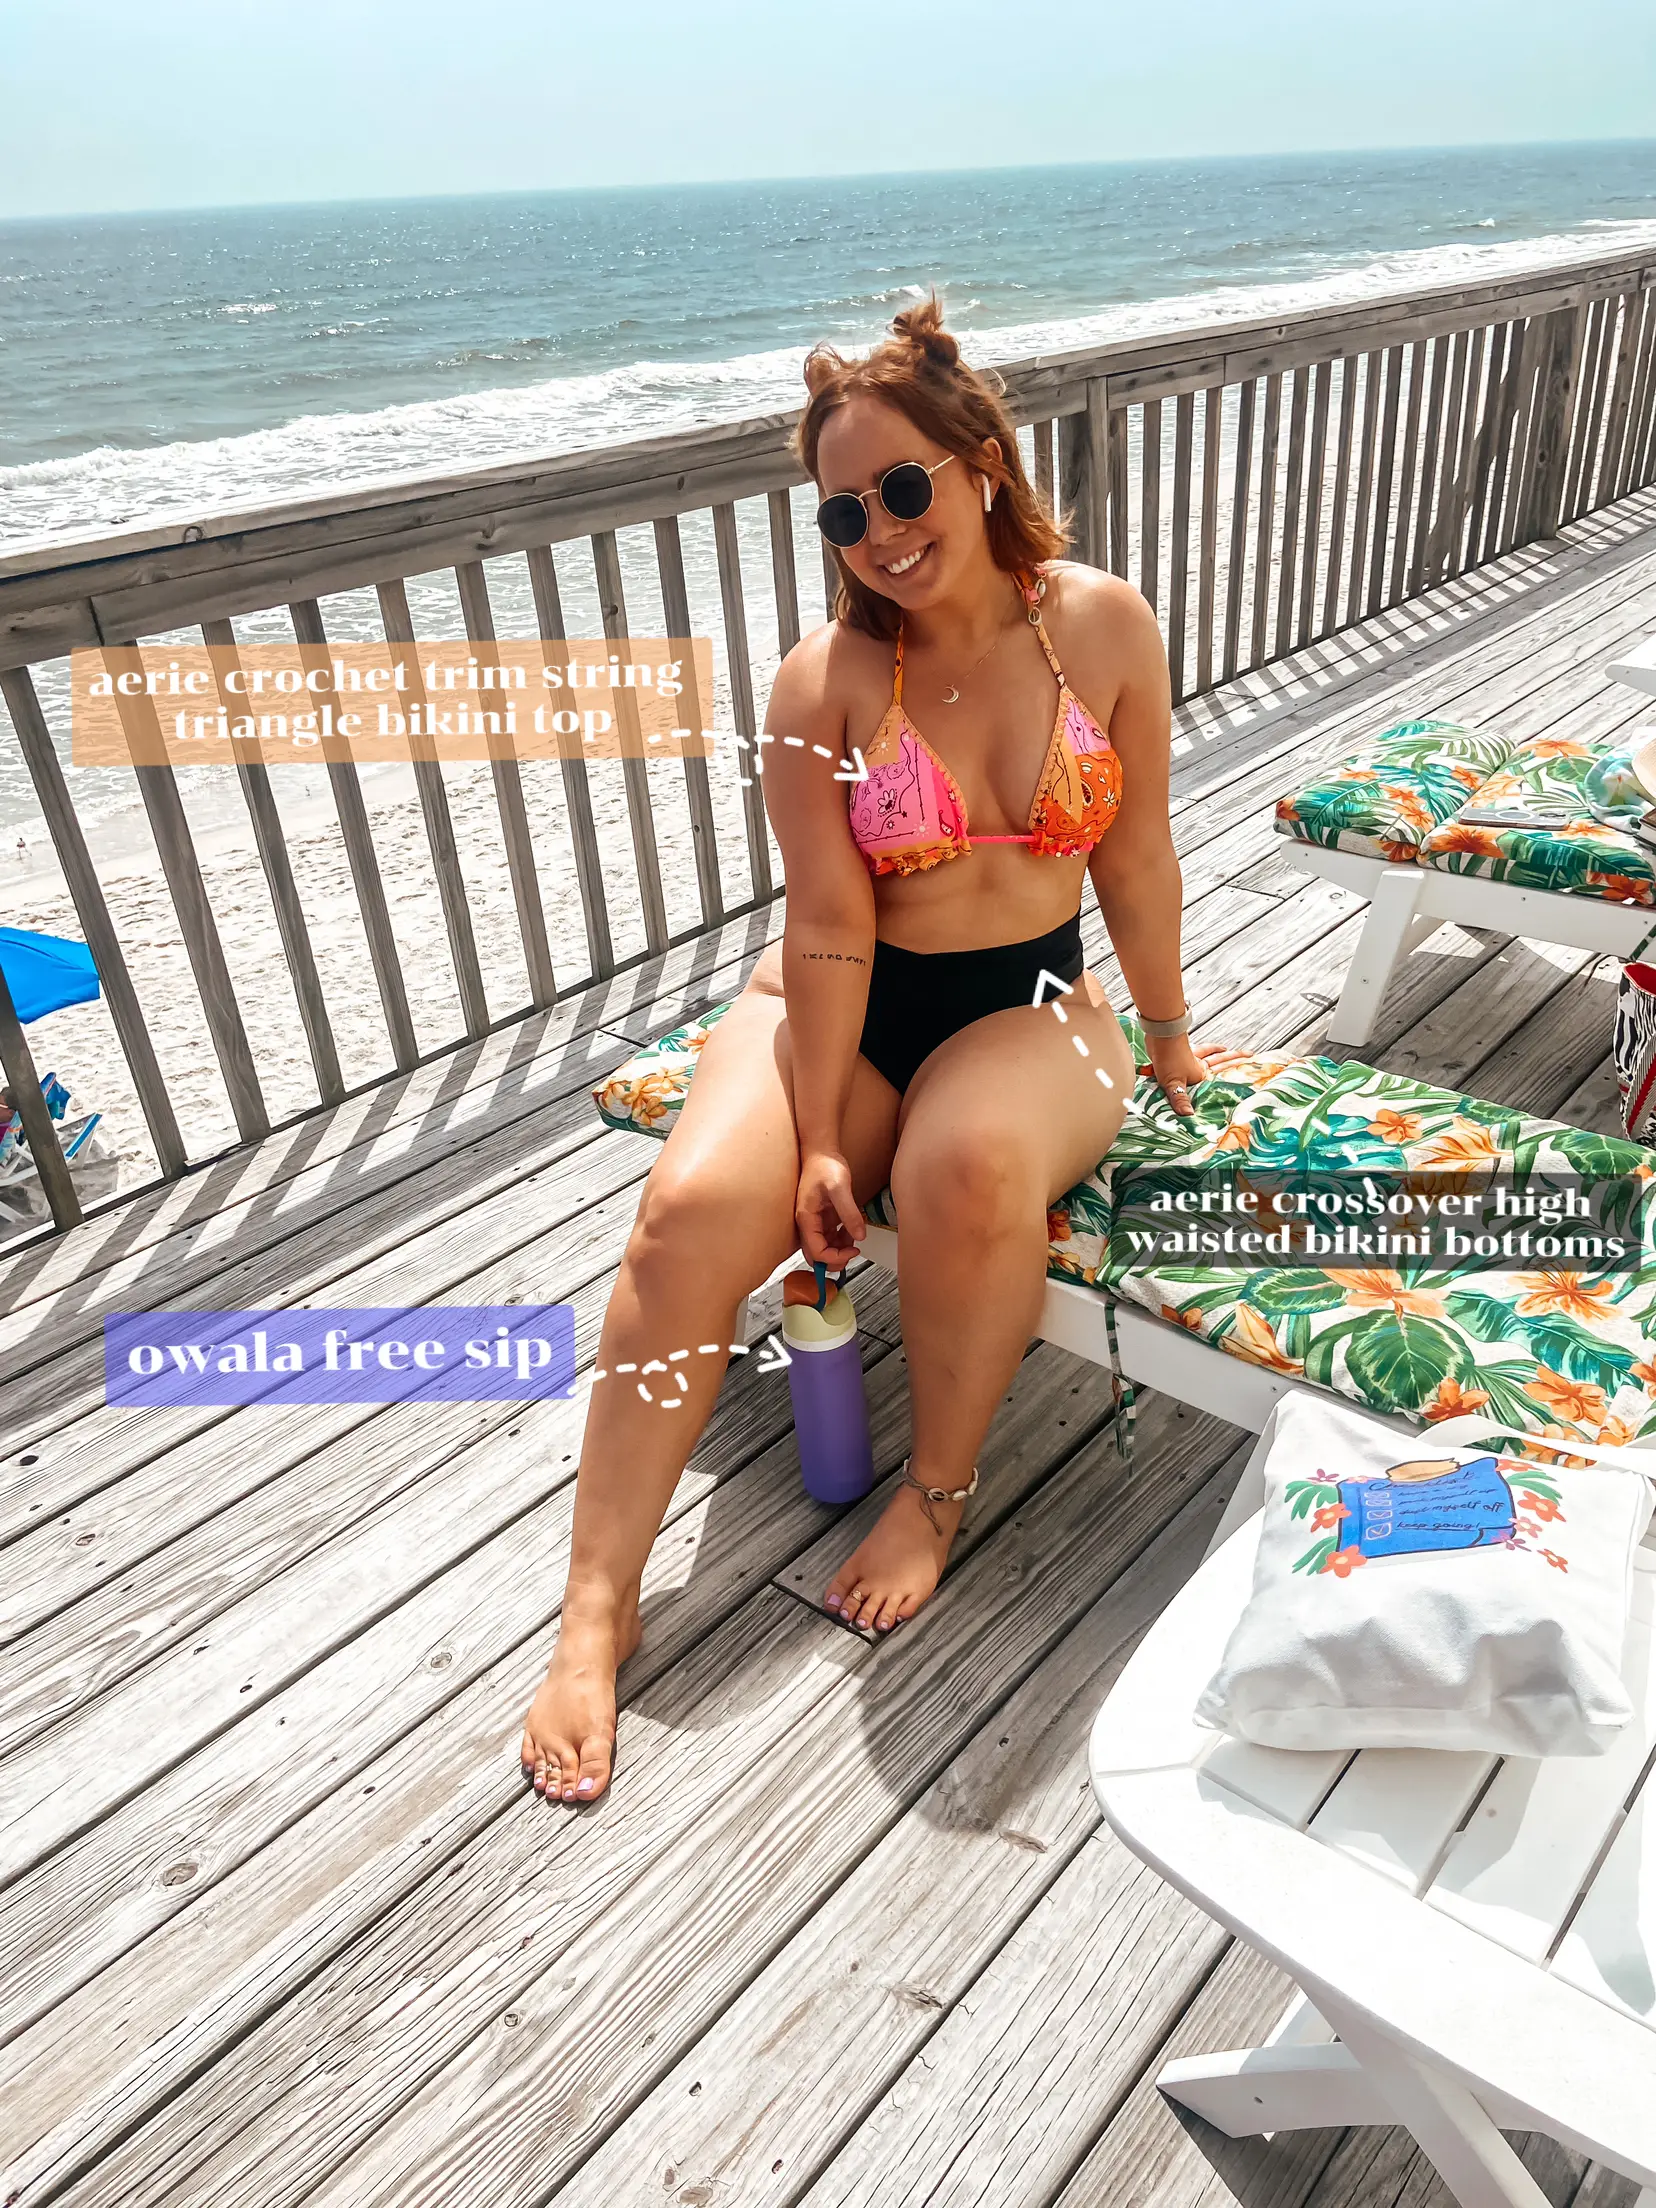 Our Review of the Aerie Crossover Bikini Bottoms